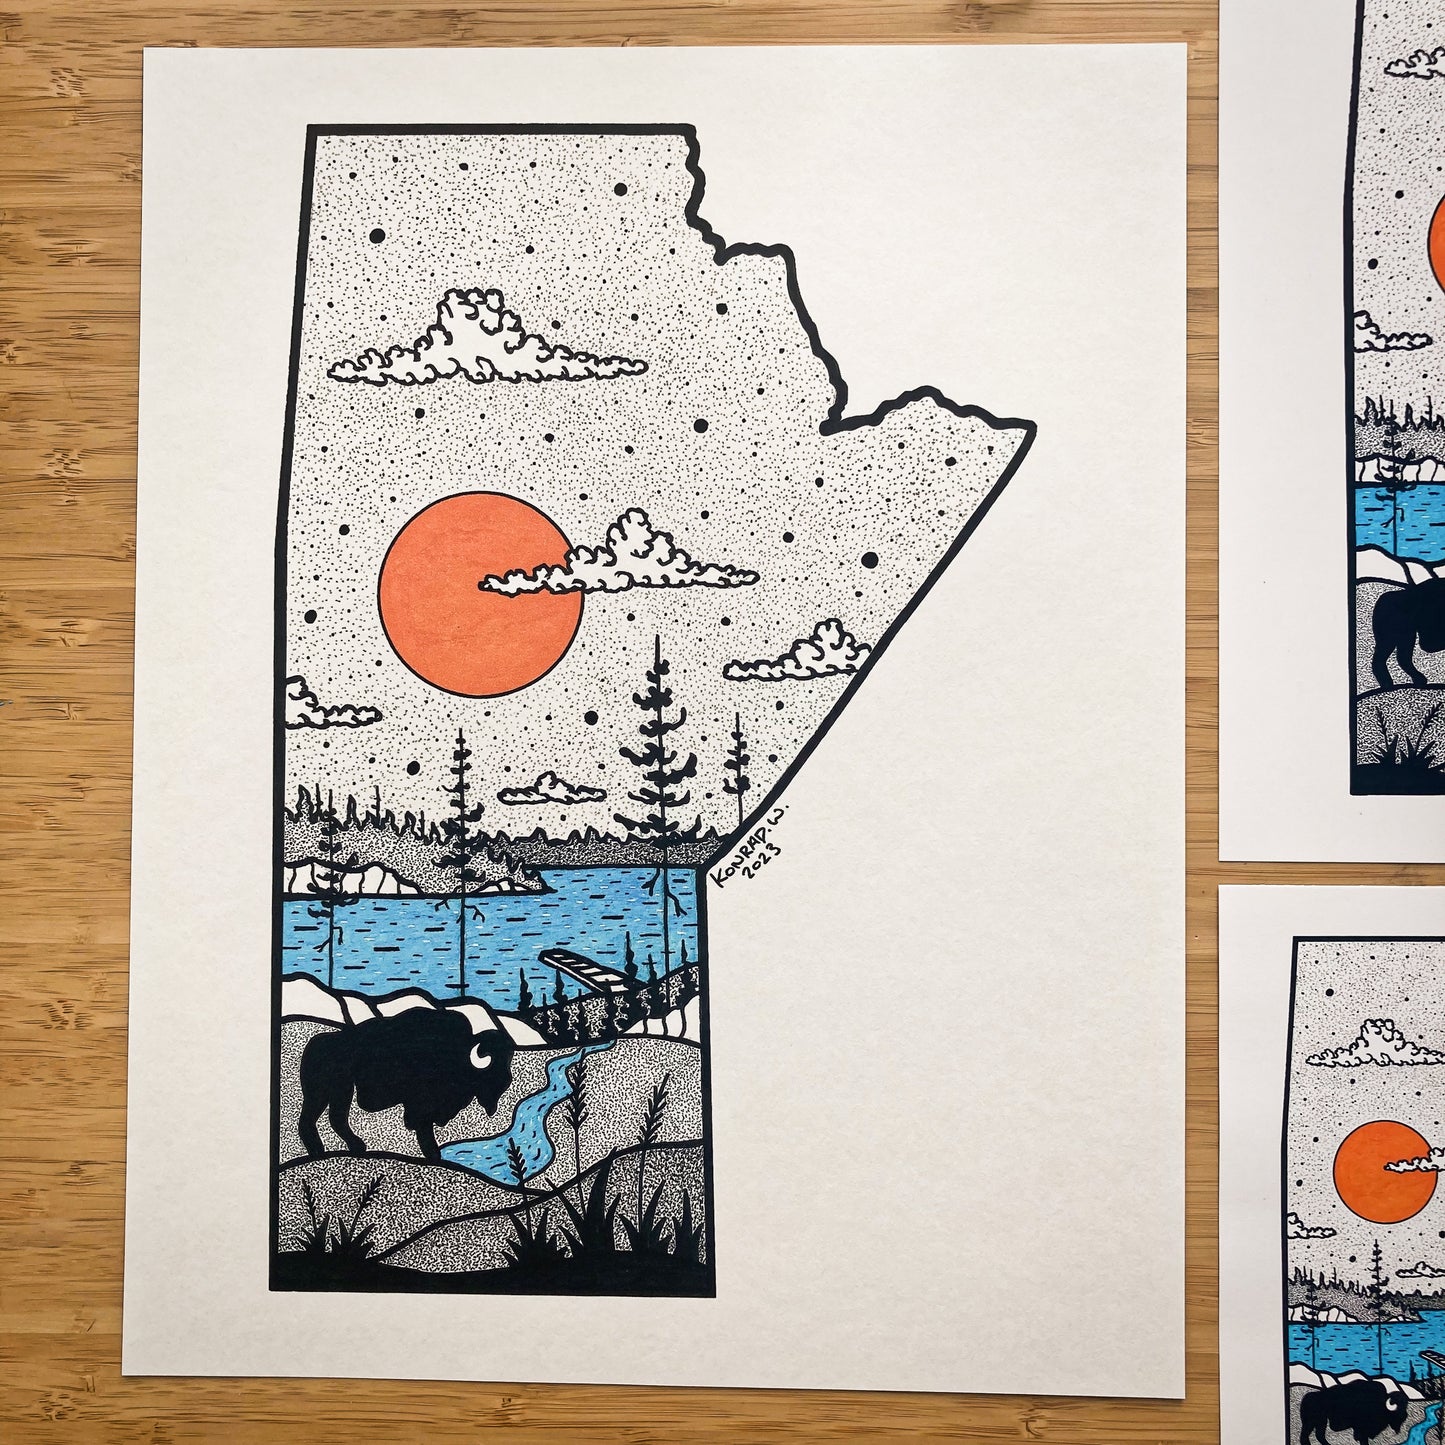 The Province of Manitoba - Pen and Ink PRINT